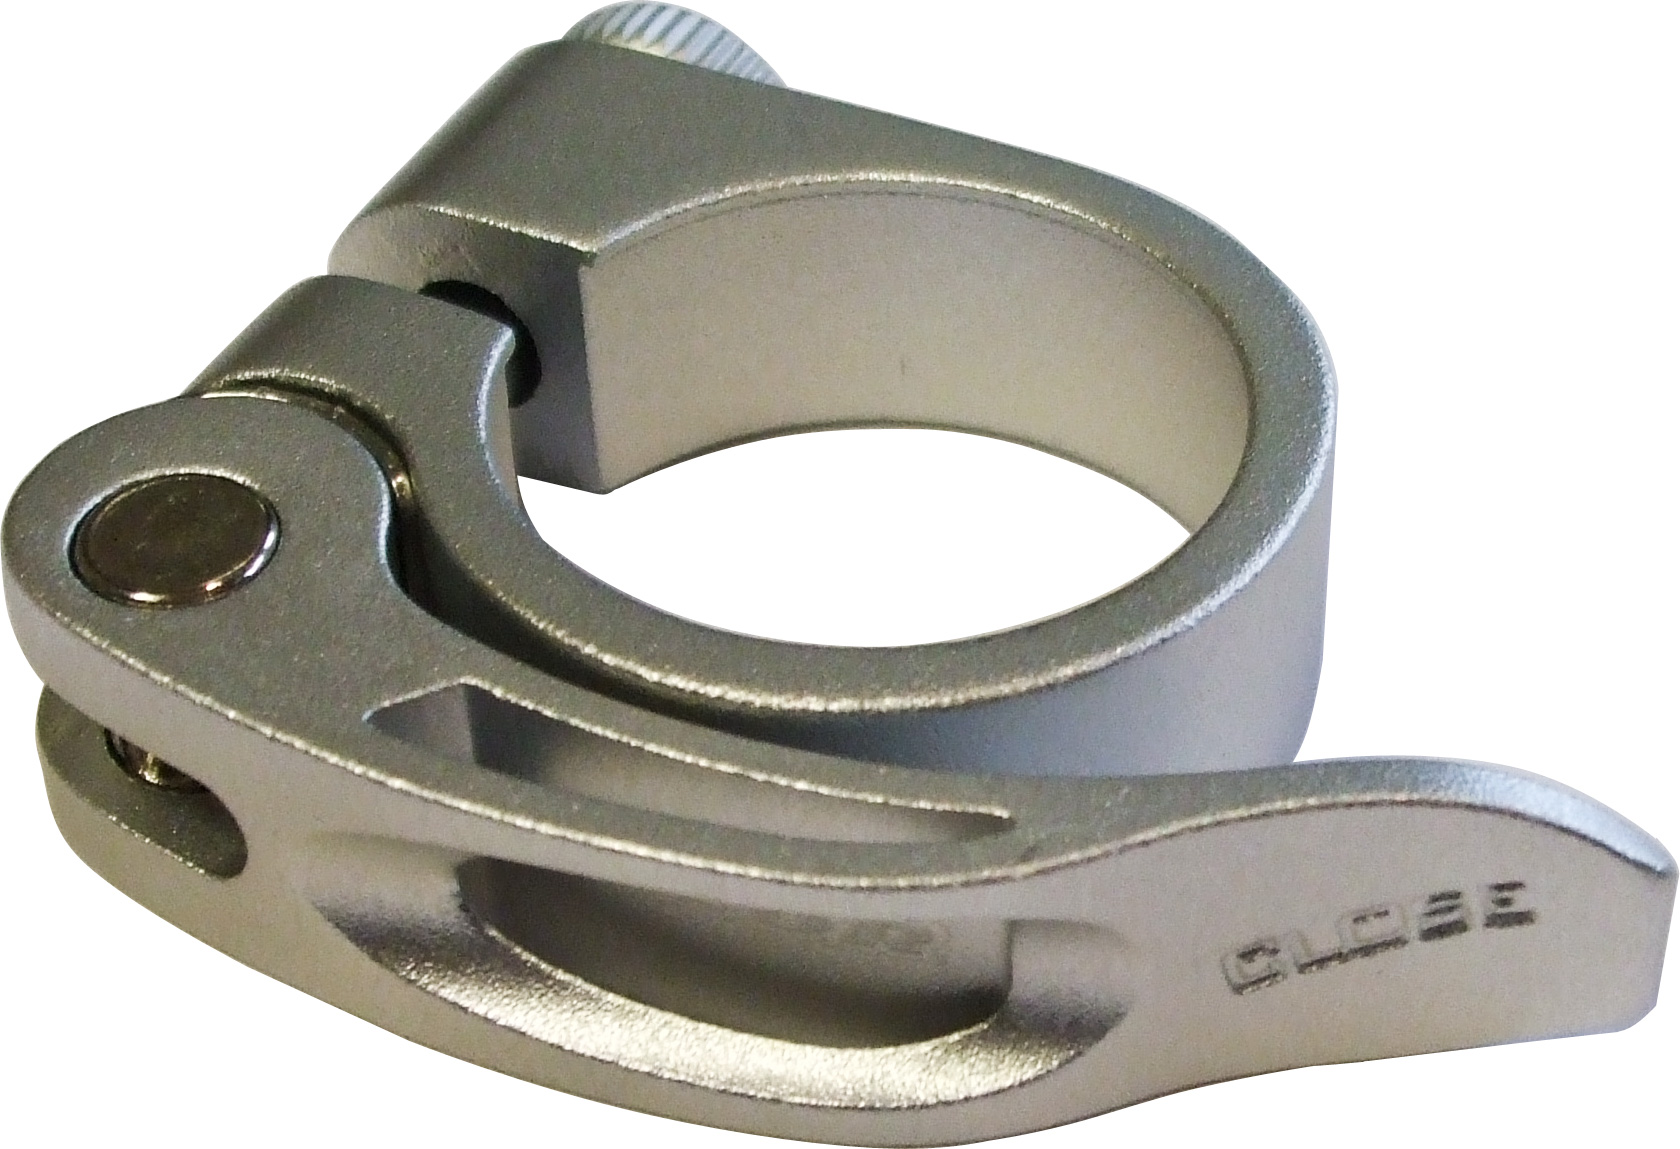 AQR26039S Acor Silver 34.9mm Alloy Q/R Seat Post Clamp